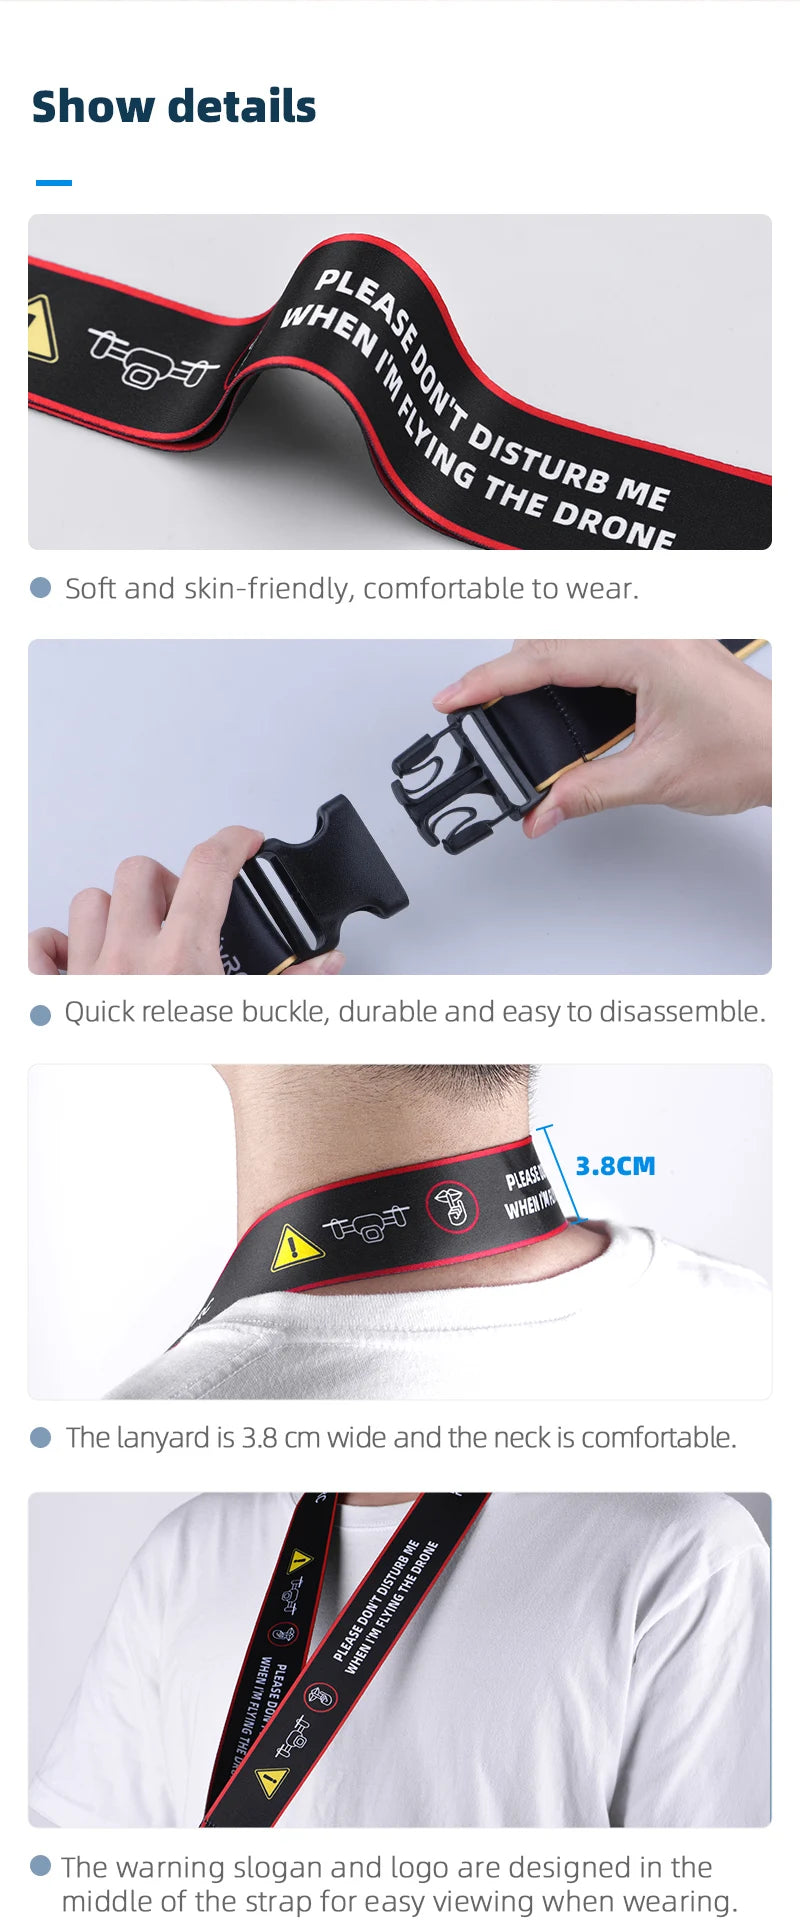 Tablet Holder, the lanyard is 3.8 cm wide and the neck is comfortable: 4 The warning slogan